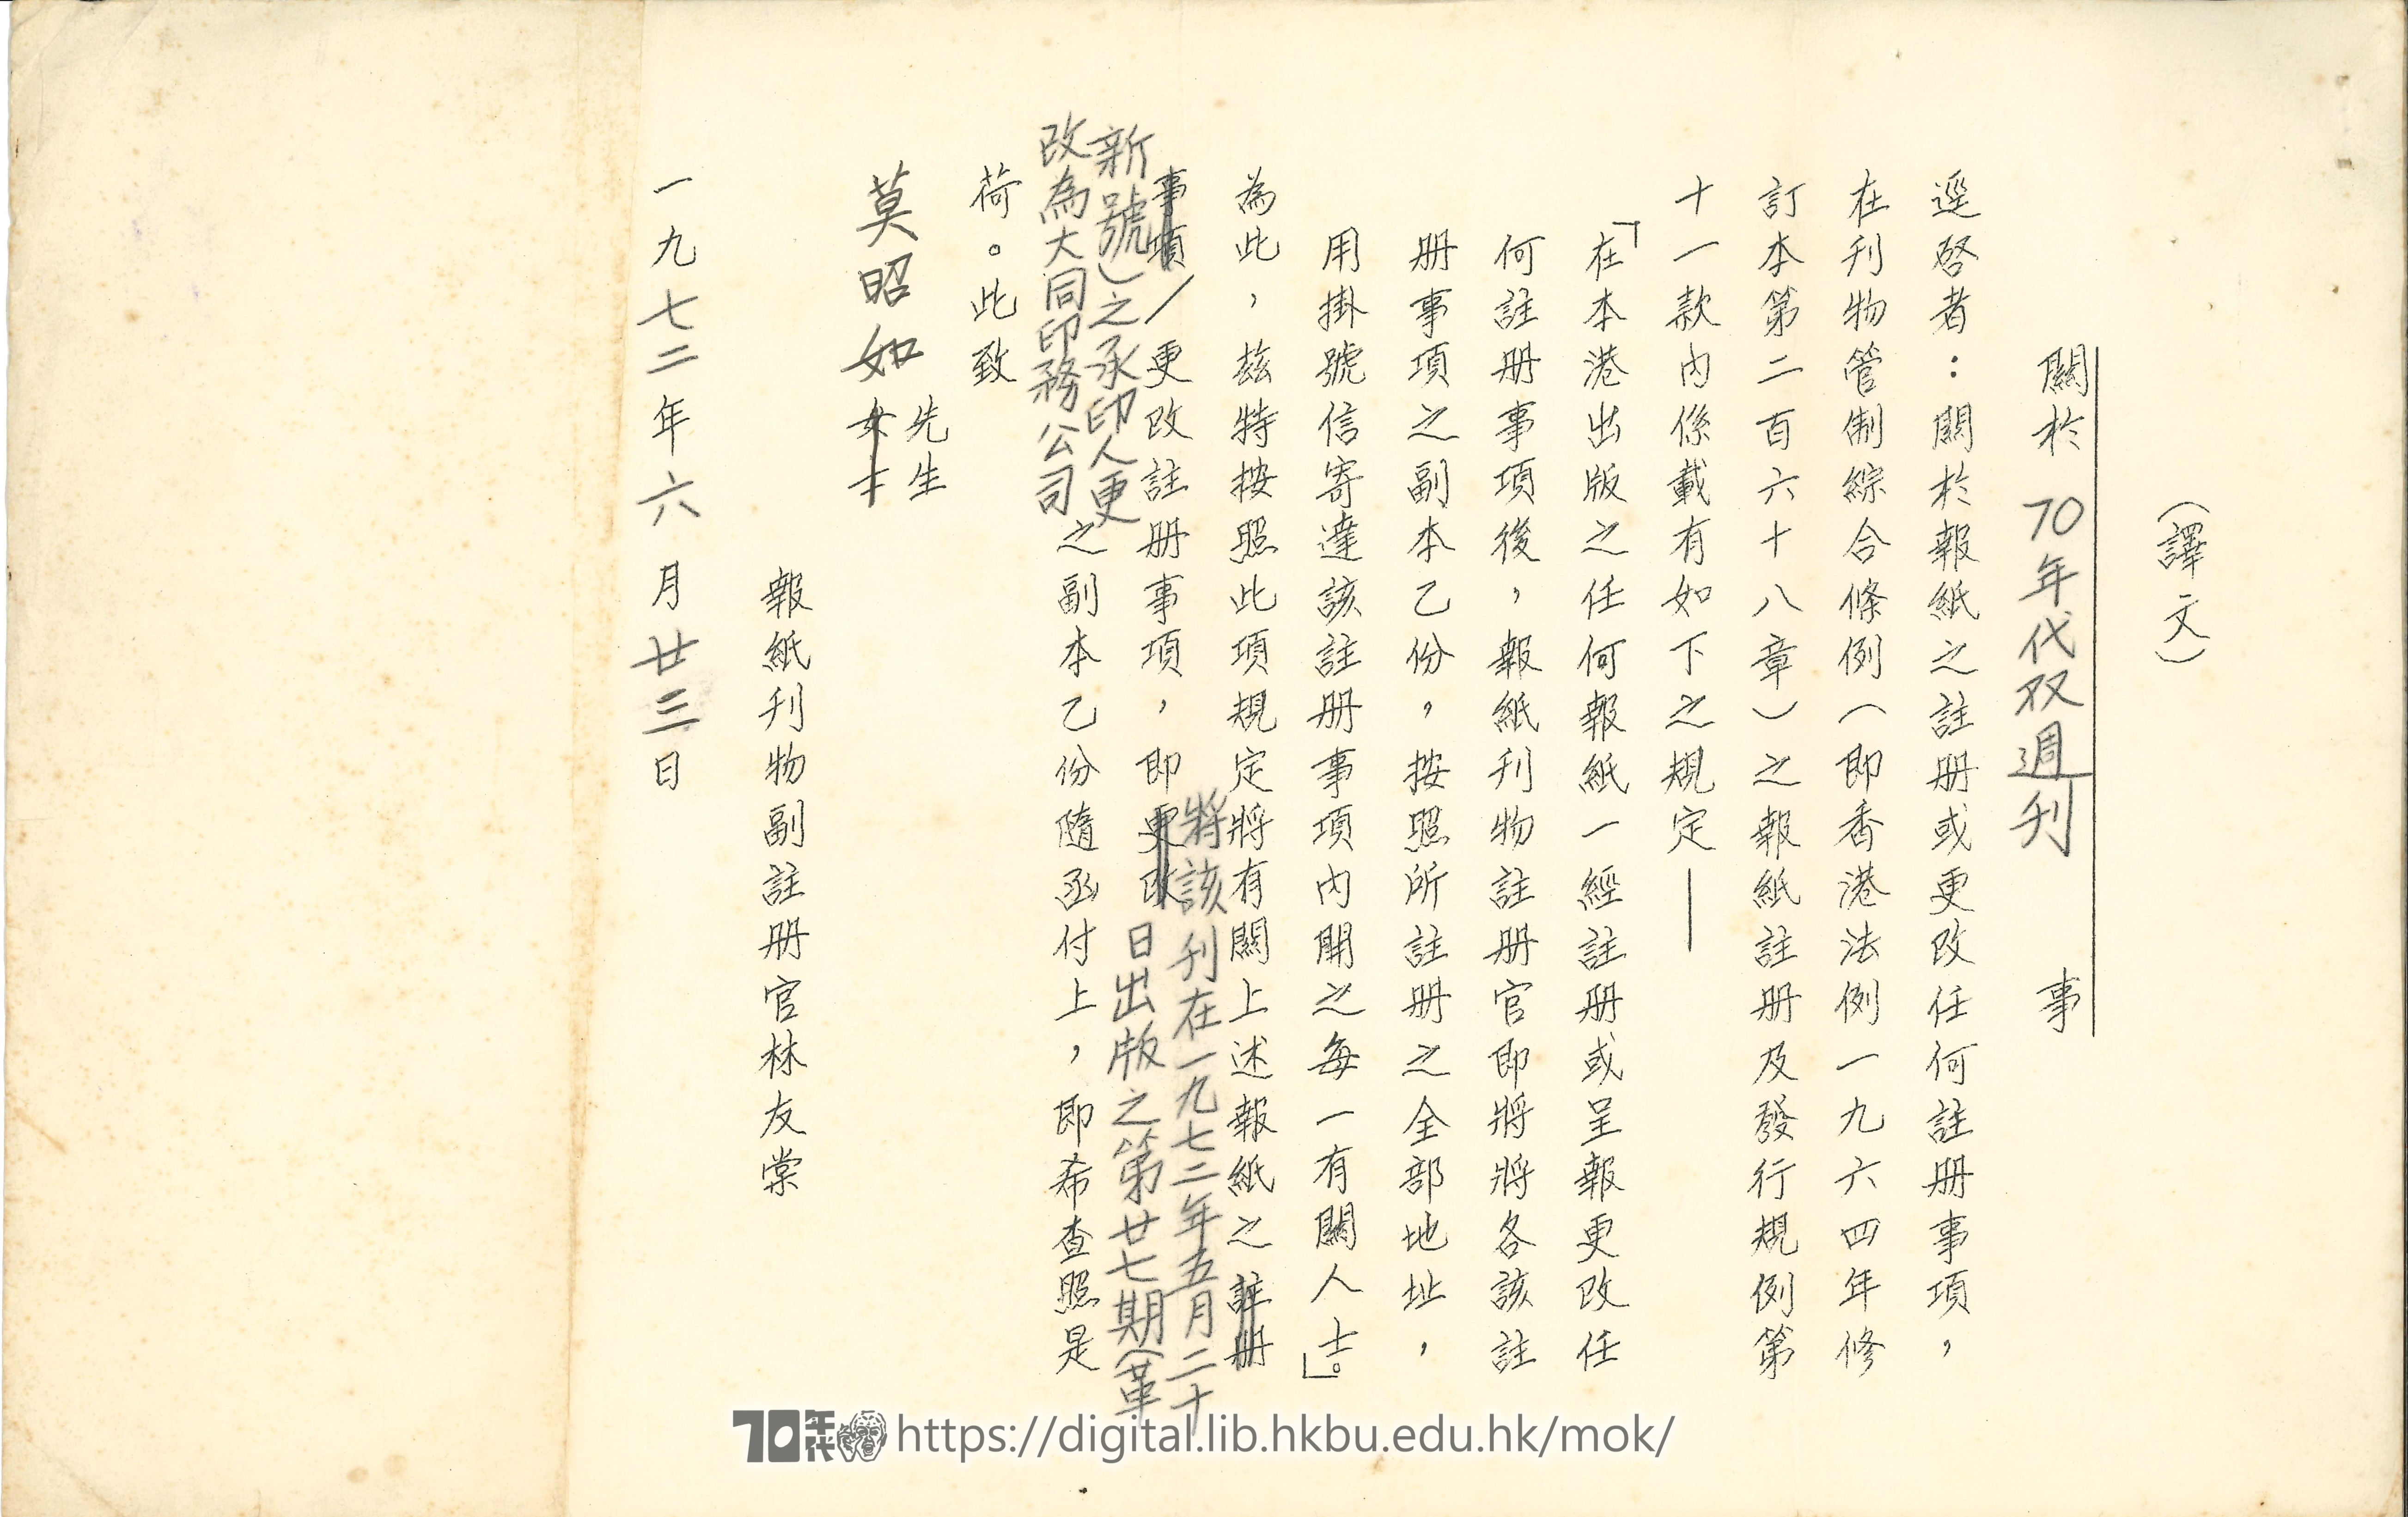   Letter from Y.T. Lin to Mok Chiu Yu Y, O.M. 